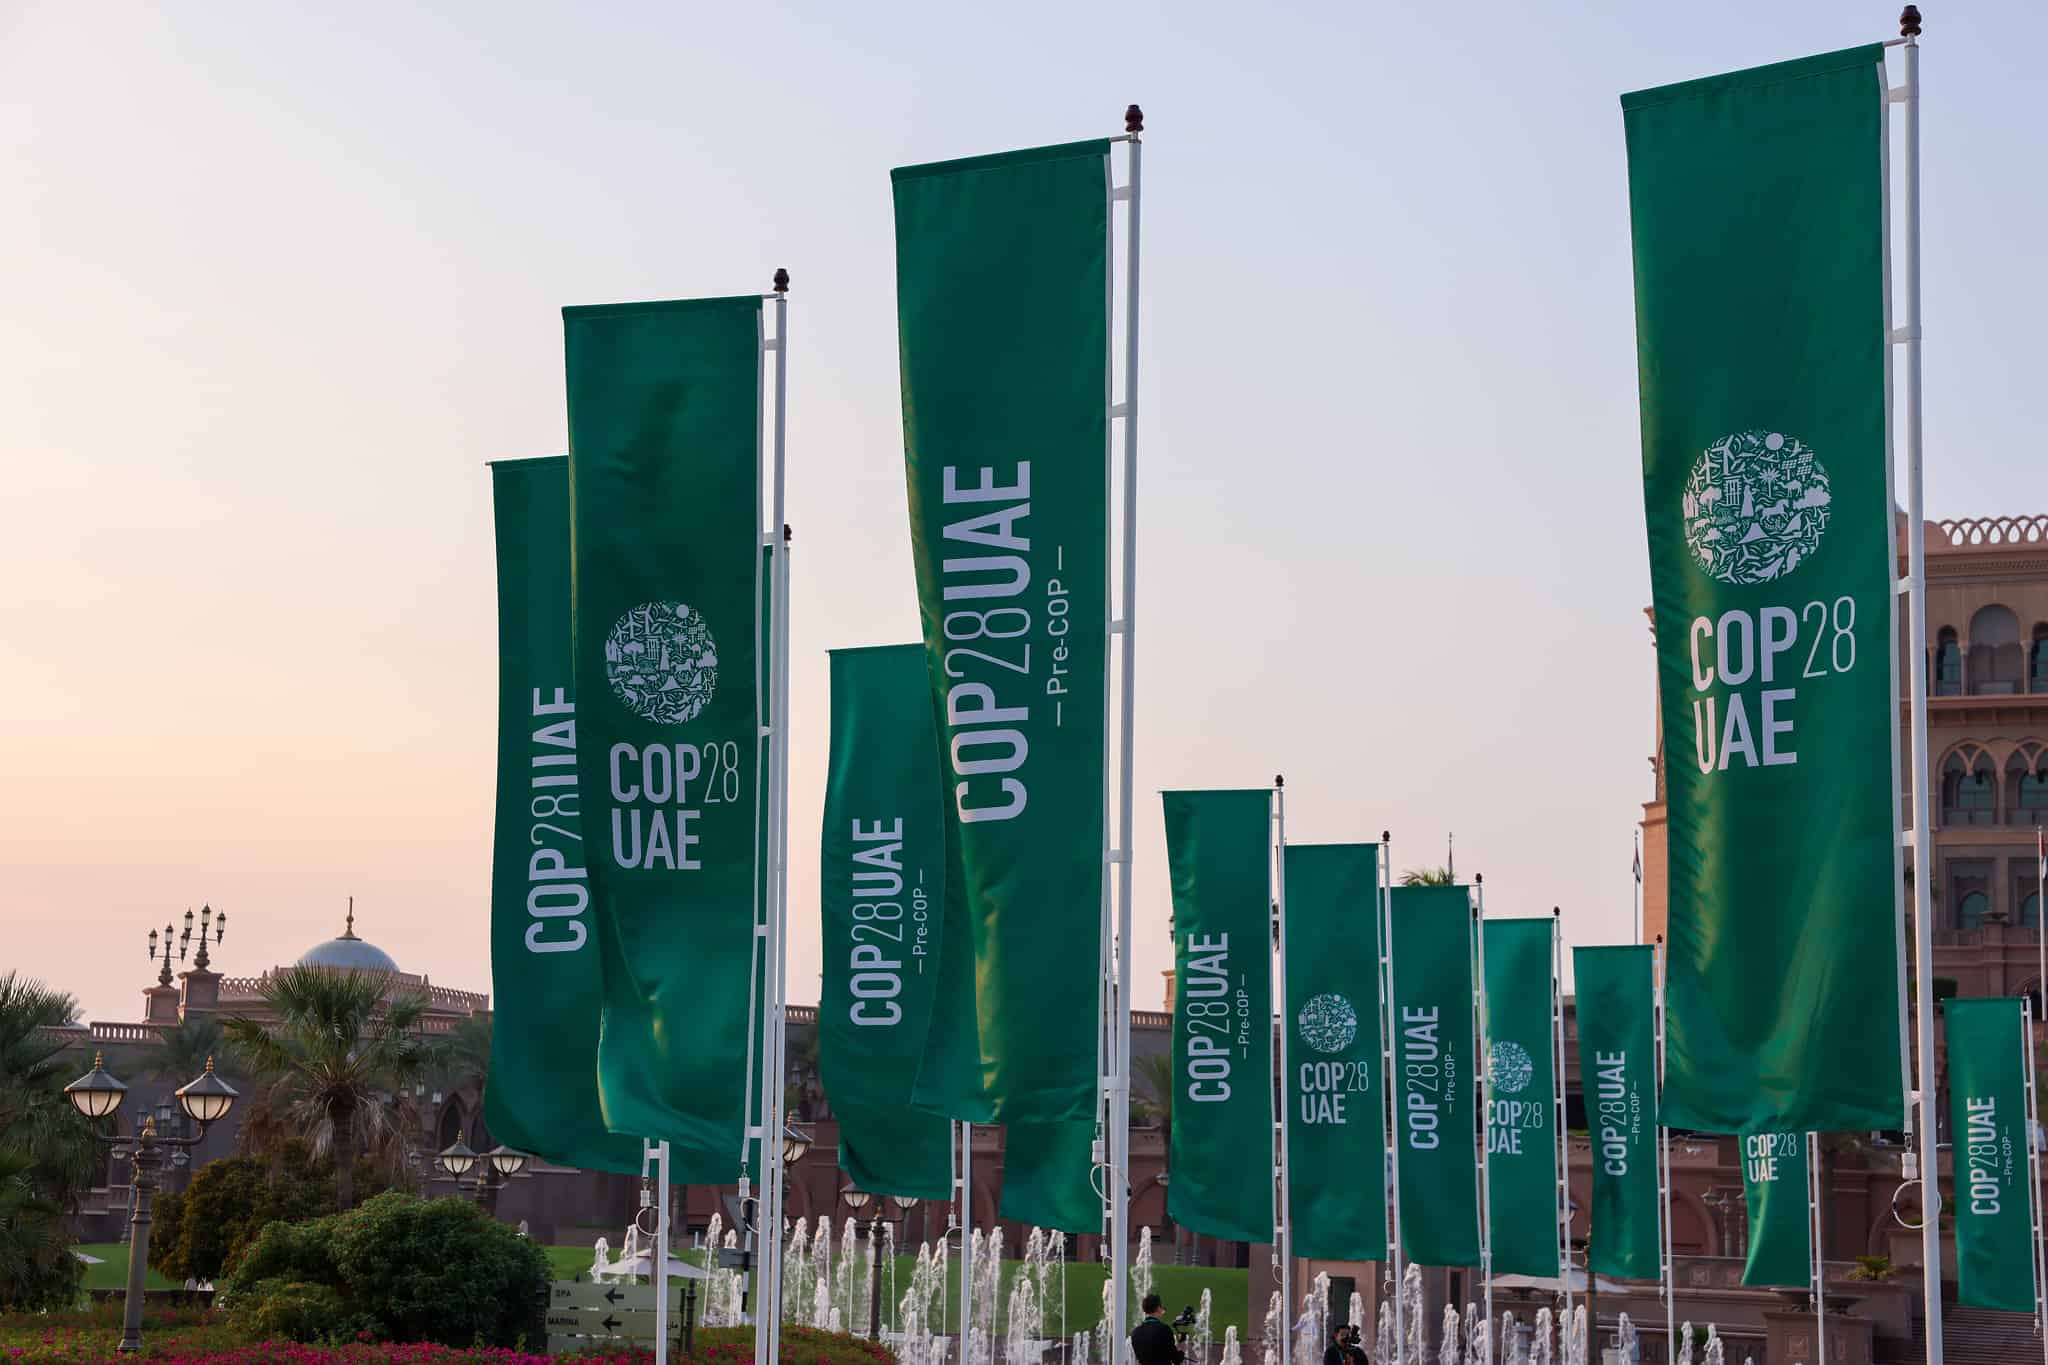 Cop28 Banners in the UAE